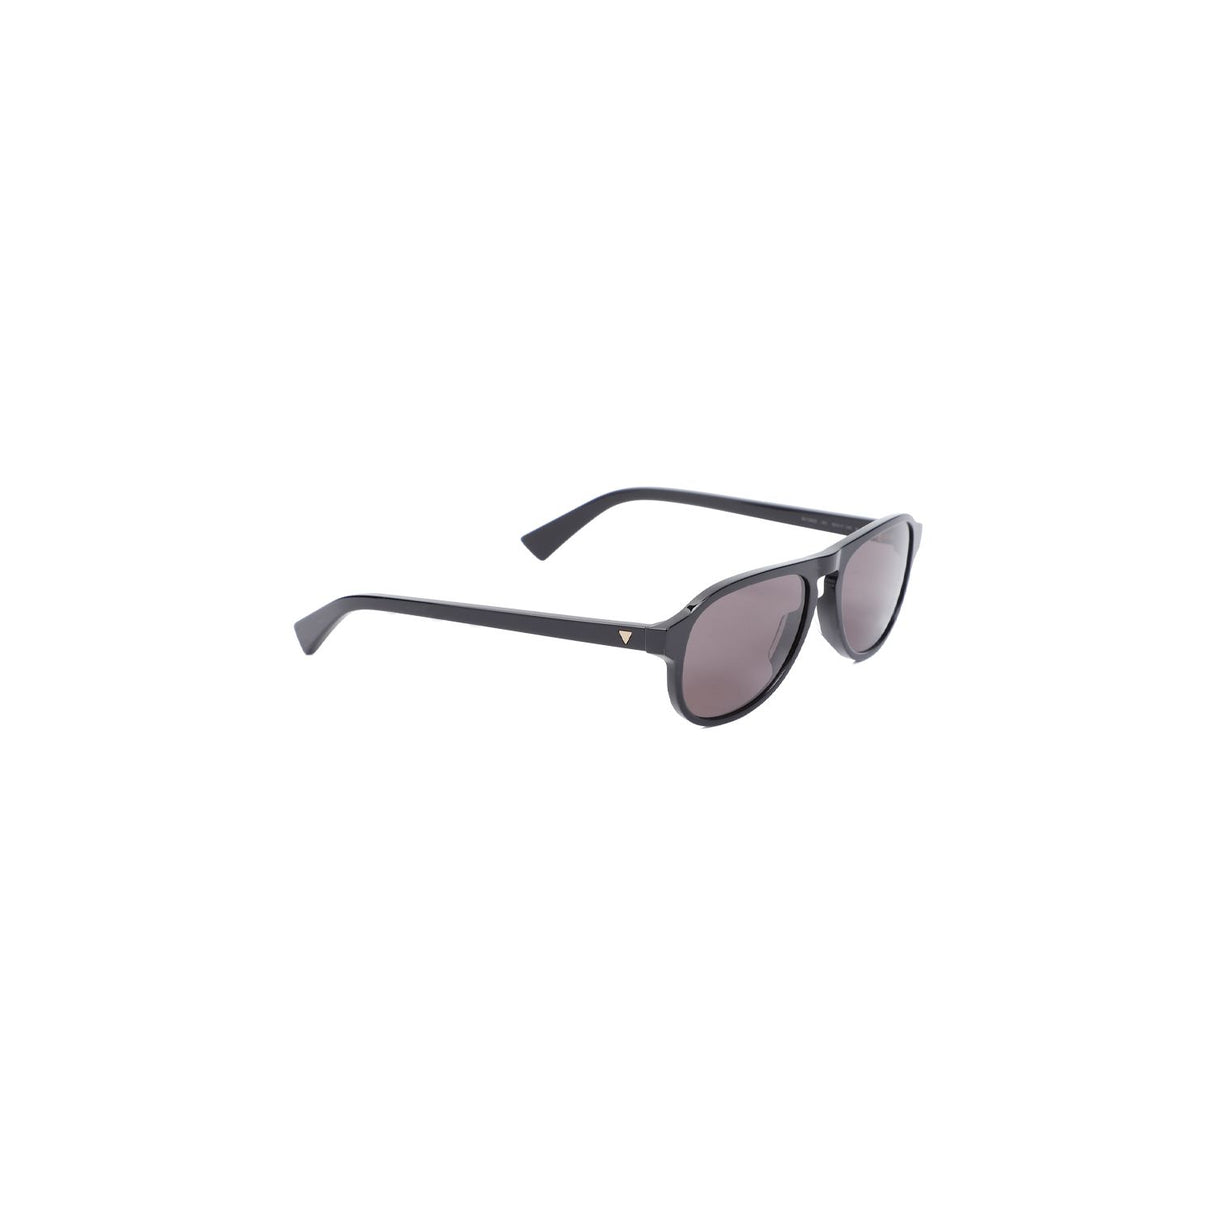 Stylish Black Sunglasses for Women - SS24 Collection